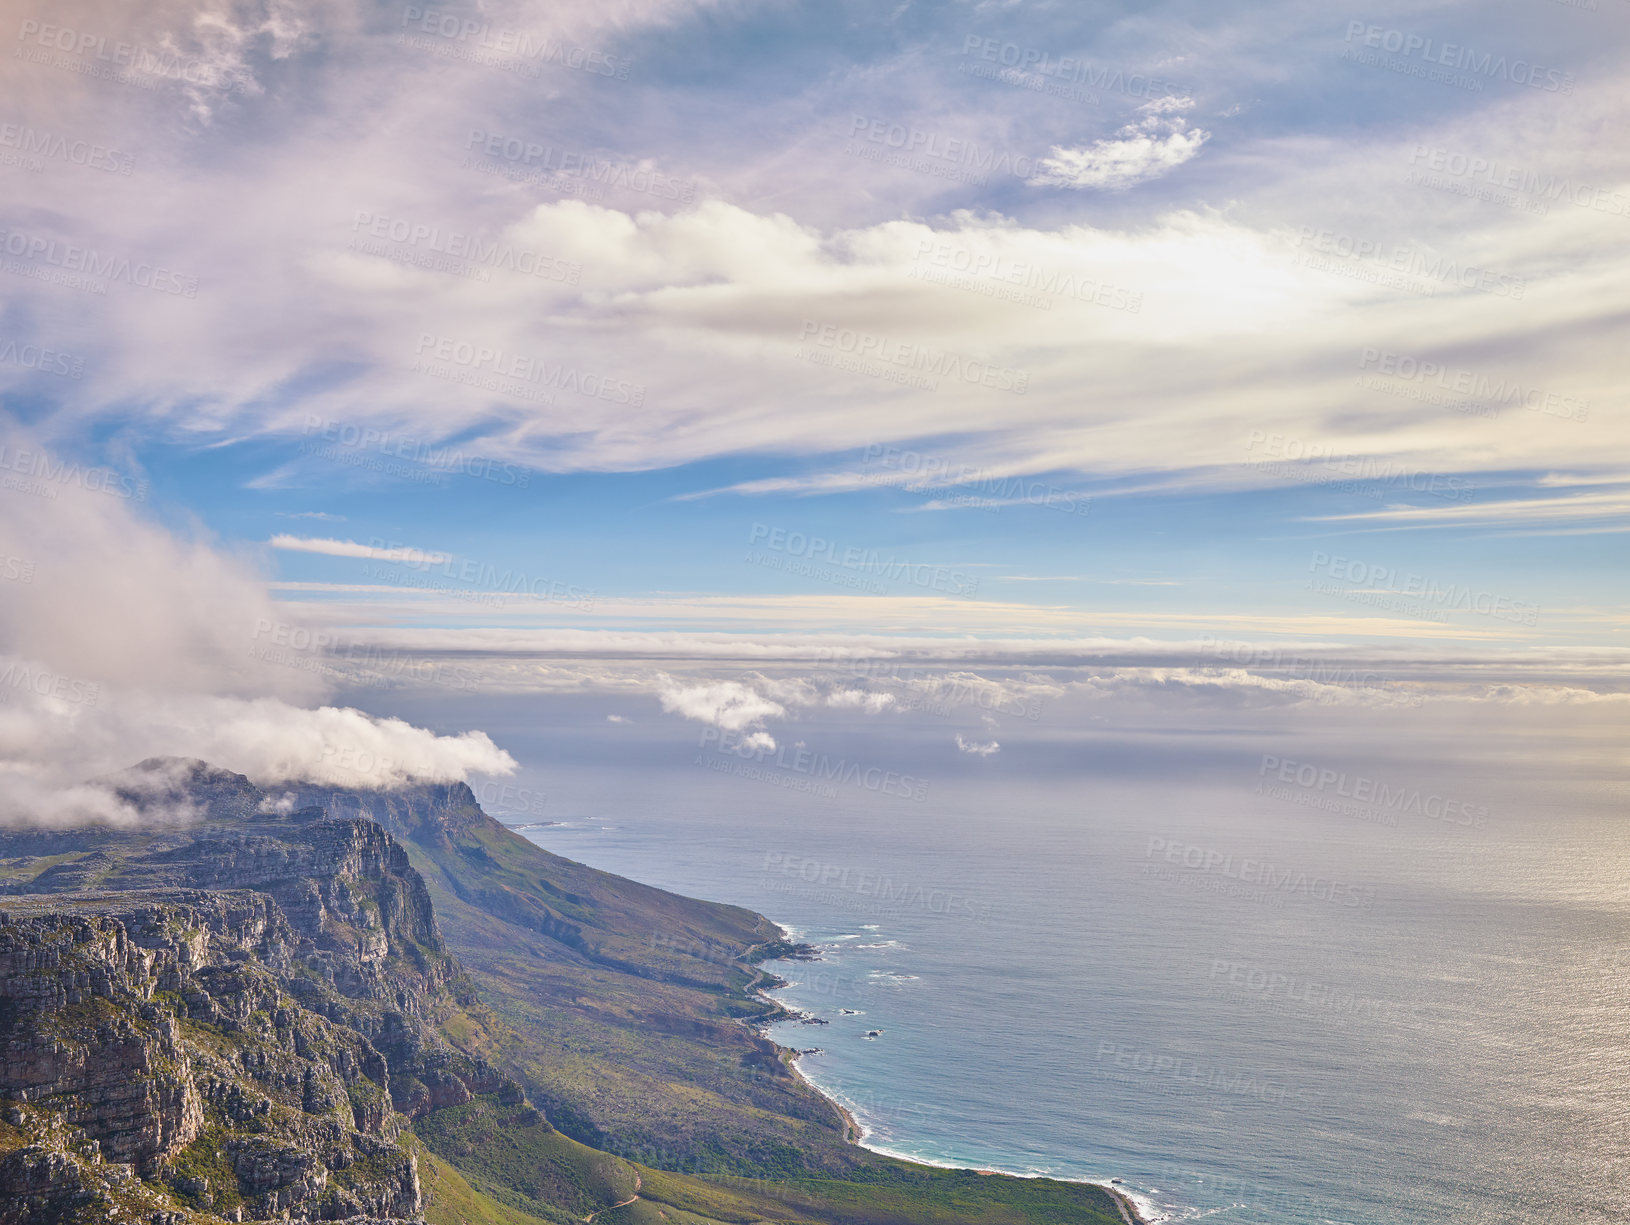 Buy stock photo Aerial view of a calm ocean and mountains with a blue cloudy sky background and copy space. Stunning nature landscape of the sea and horizon from Table Mountain tourism destination in Cape Town